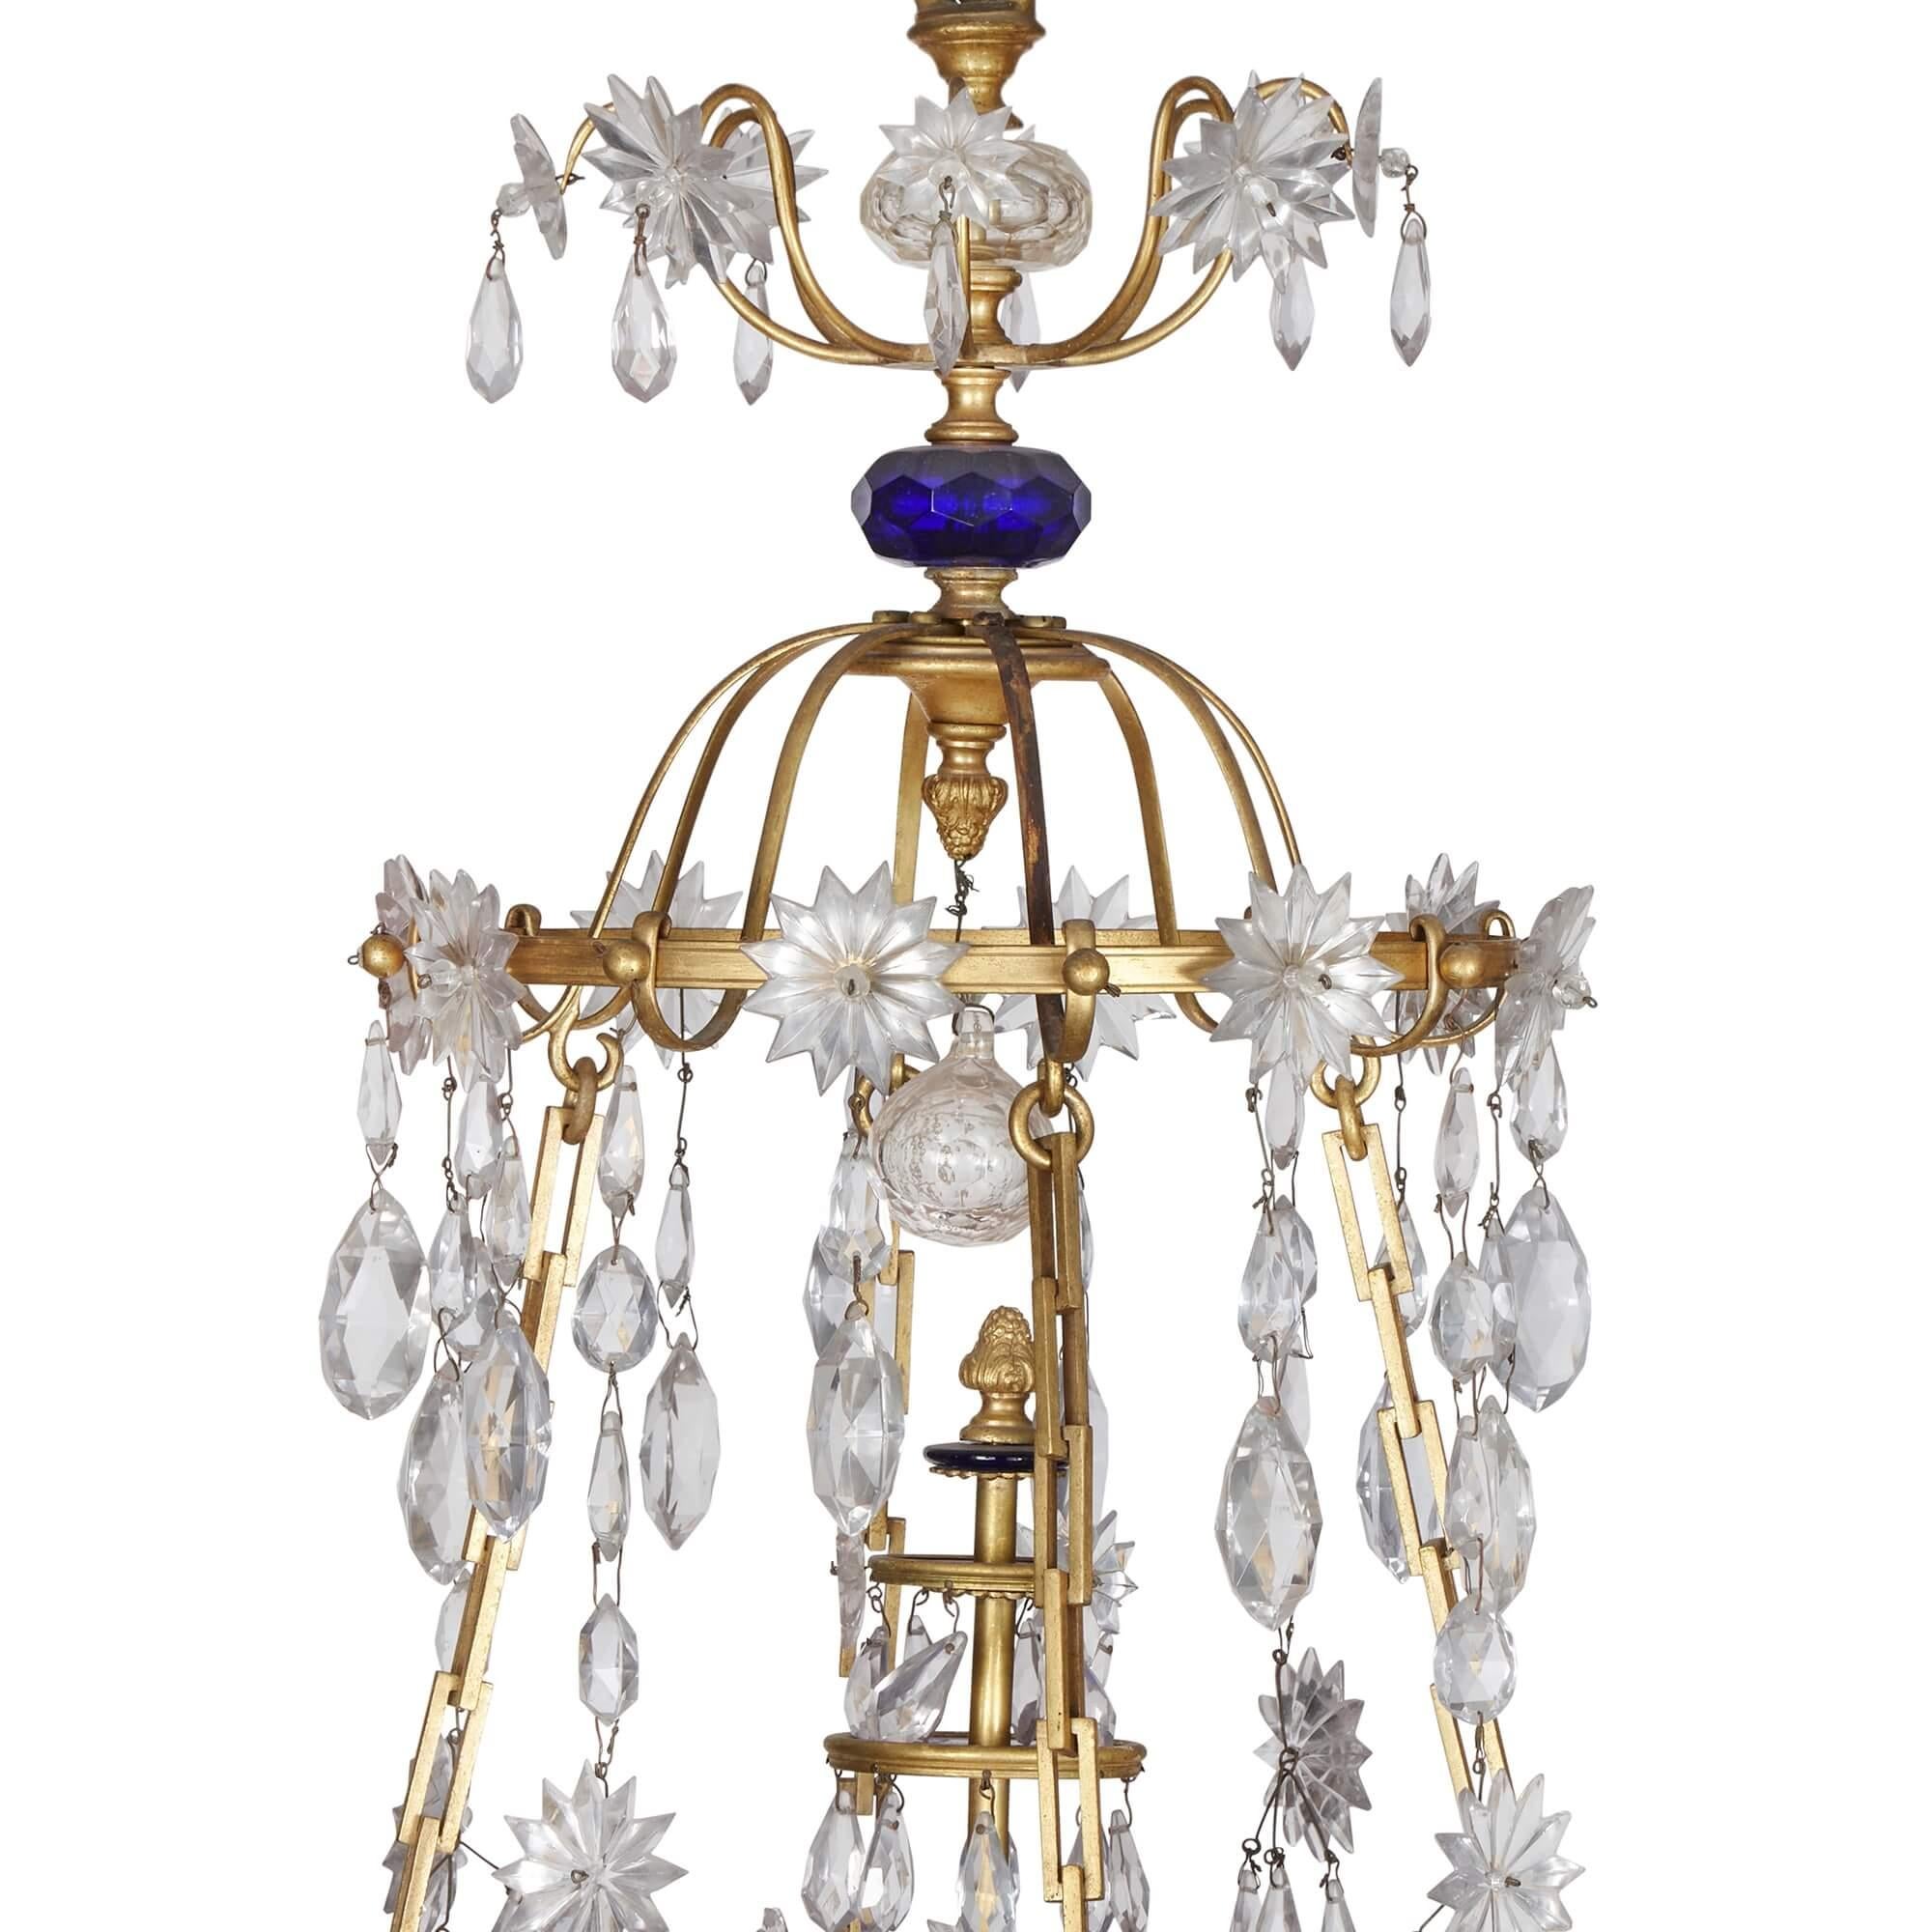 Baltic Neoclassical ormolu, blue and amethyst glass 16-light chandelier
Baltic, Early 19th Century 
Height 119.5cm, diameter 76cm

Wonderfully crafted in the early 19th century in the refined Neoclassical style, the chandelier showcases the expert